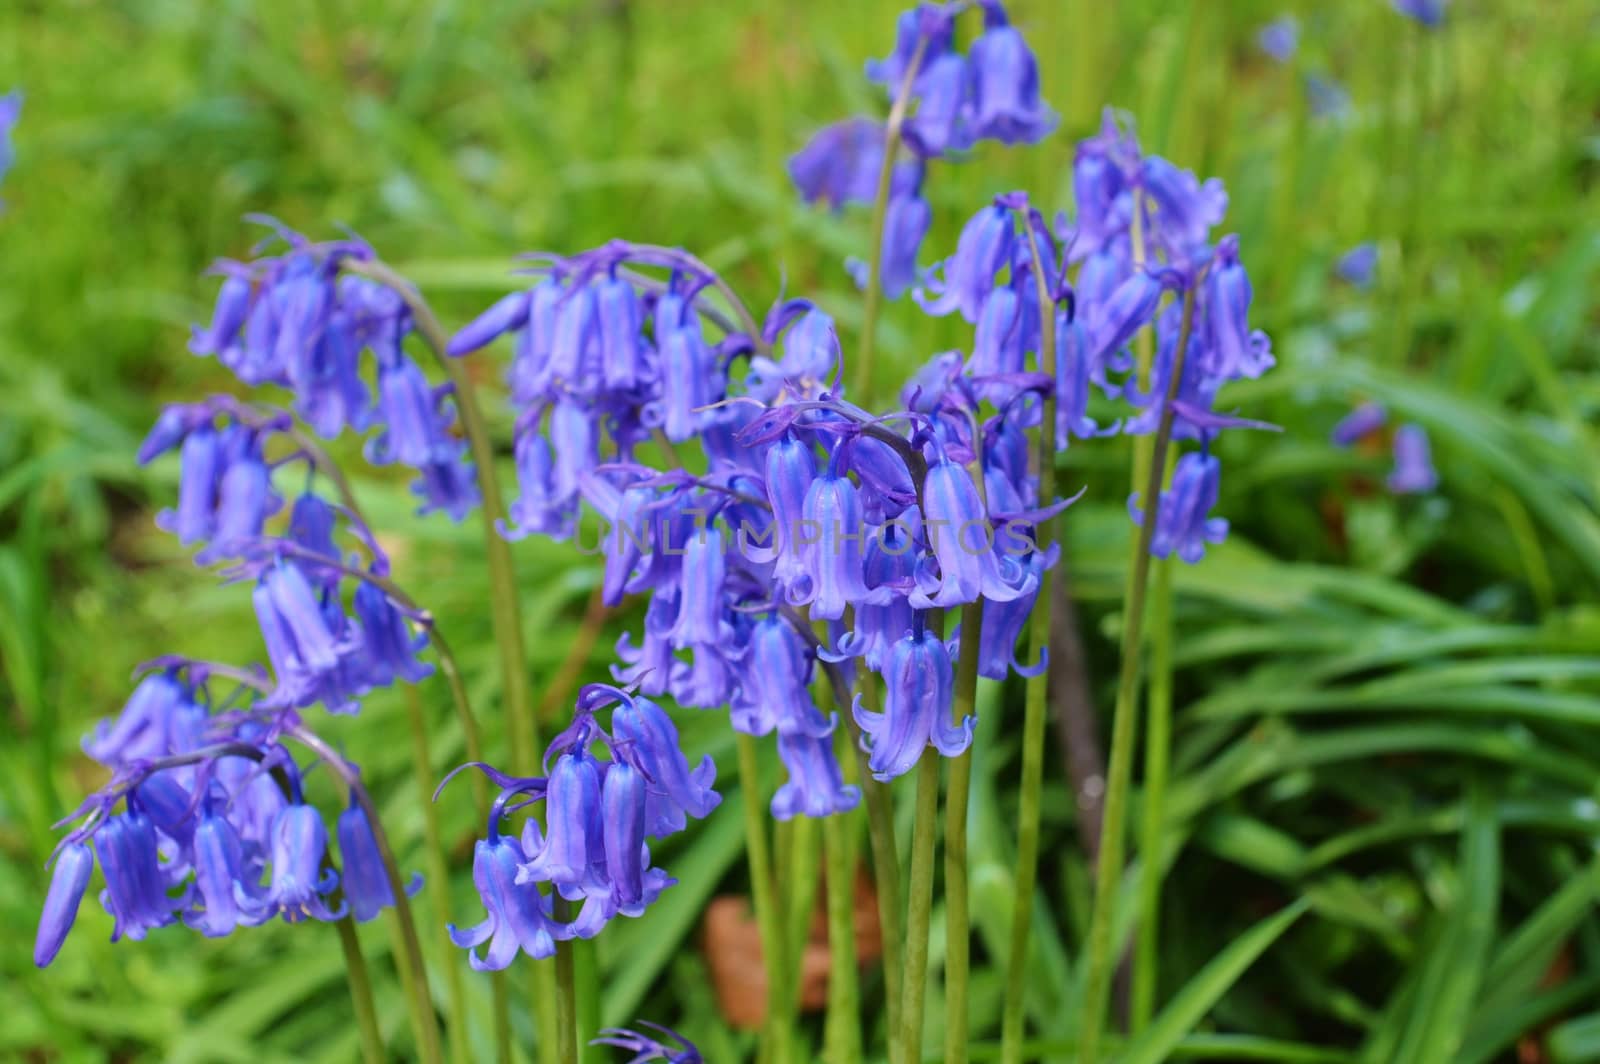 A close-up image of Spring flowering Bluebells.